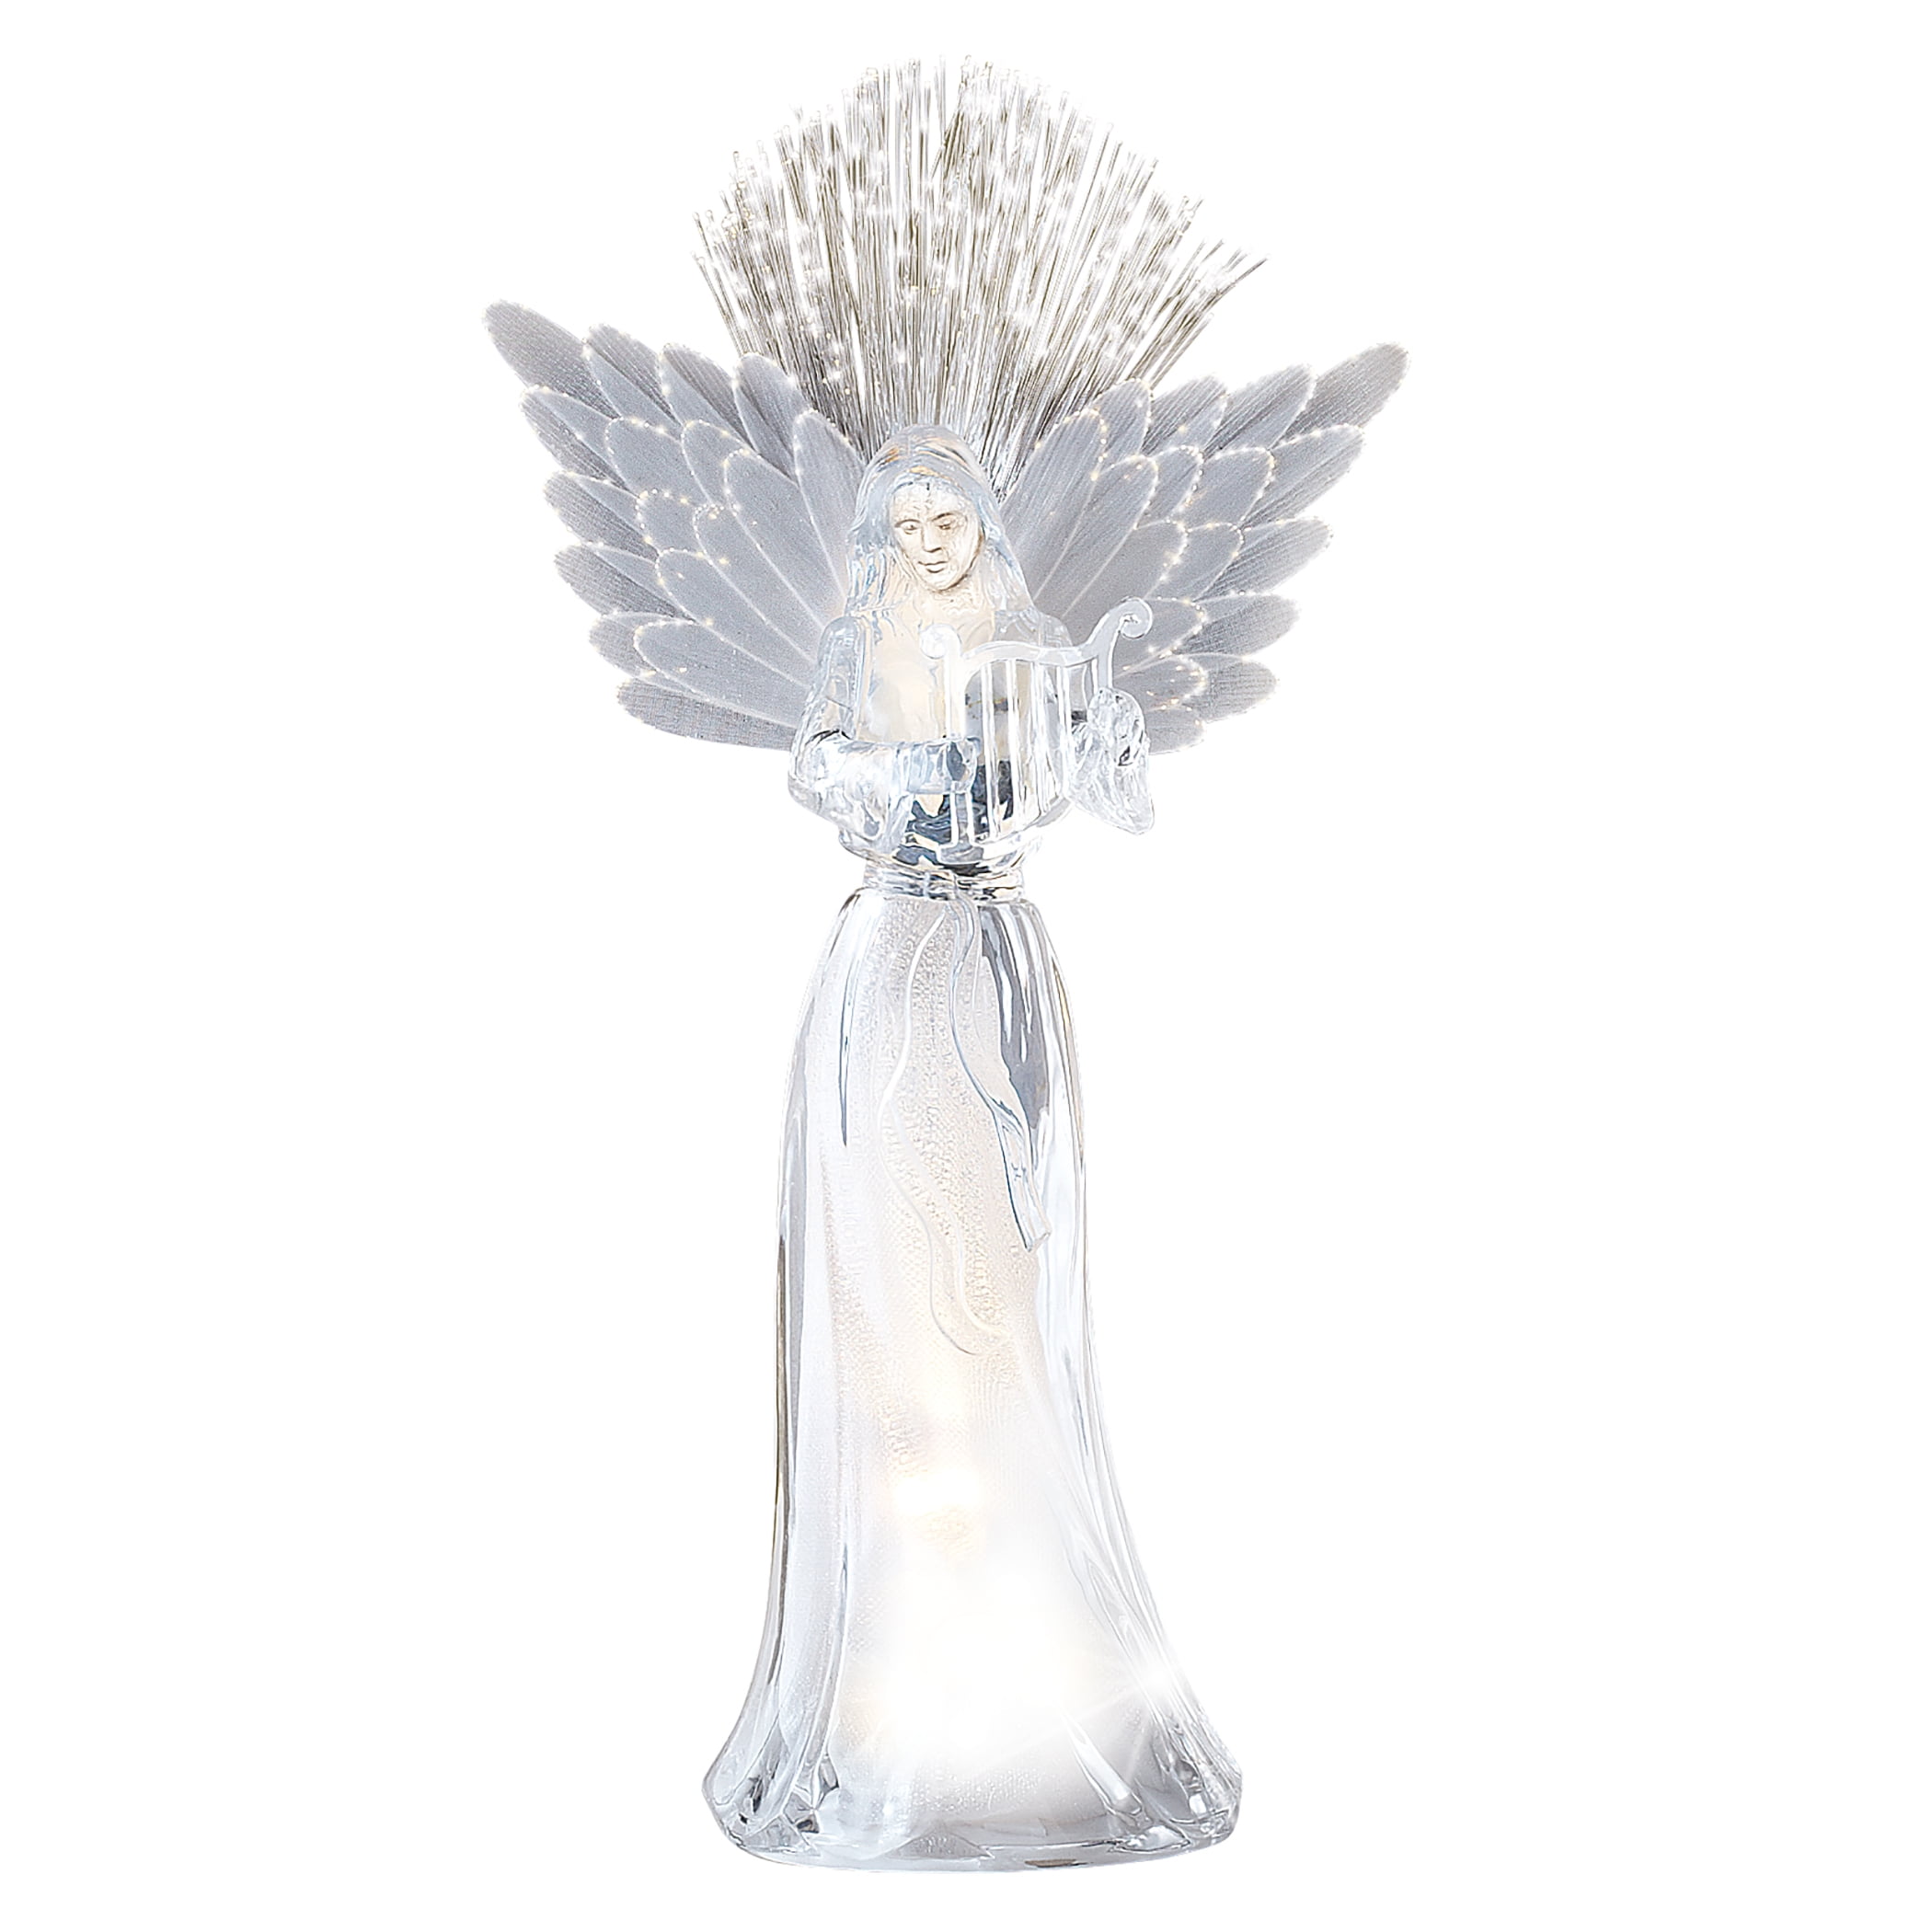 ADORABLE VINTAGE BLUE & SILVER GLITTERY ANGEL WITH HARP FIGURINE. 